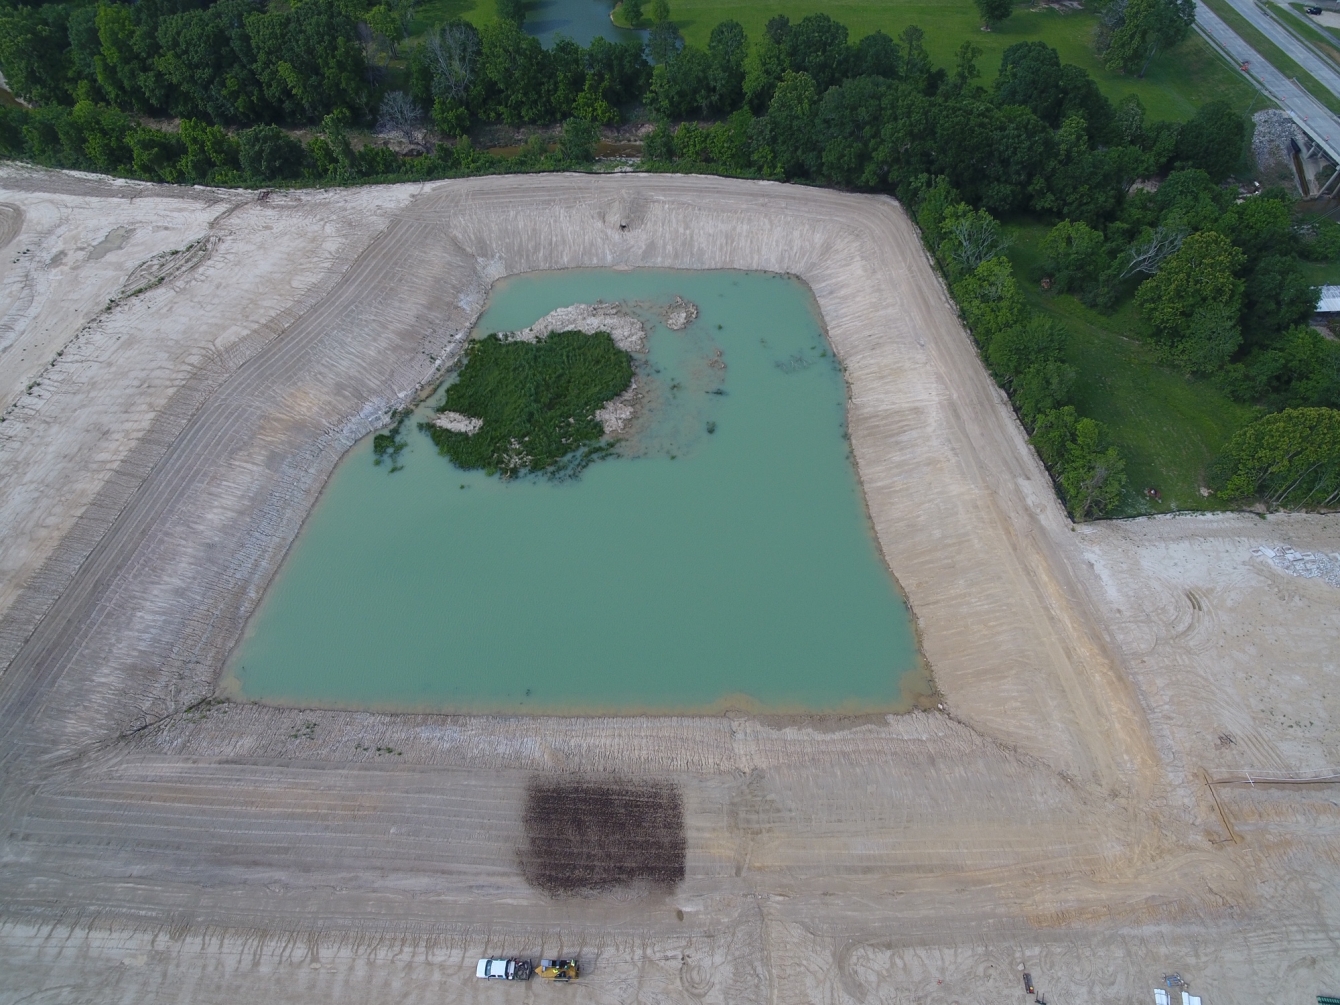 An aerial view showing the scope of the project. Based on the poor soil conditions and the slopes, Grass Master applied ProGanics DUAL to the site. Photo courtesy of Earth & Turf Reps